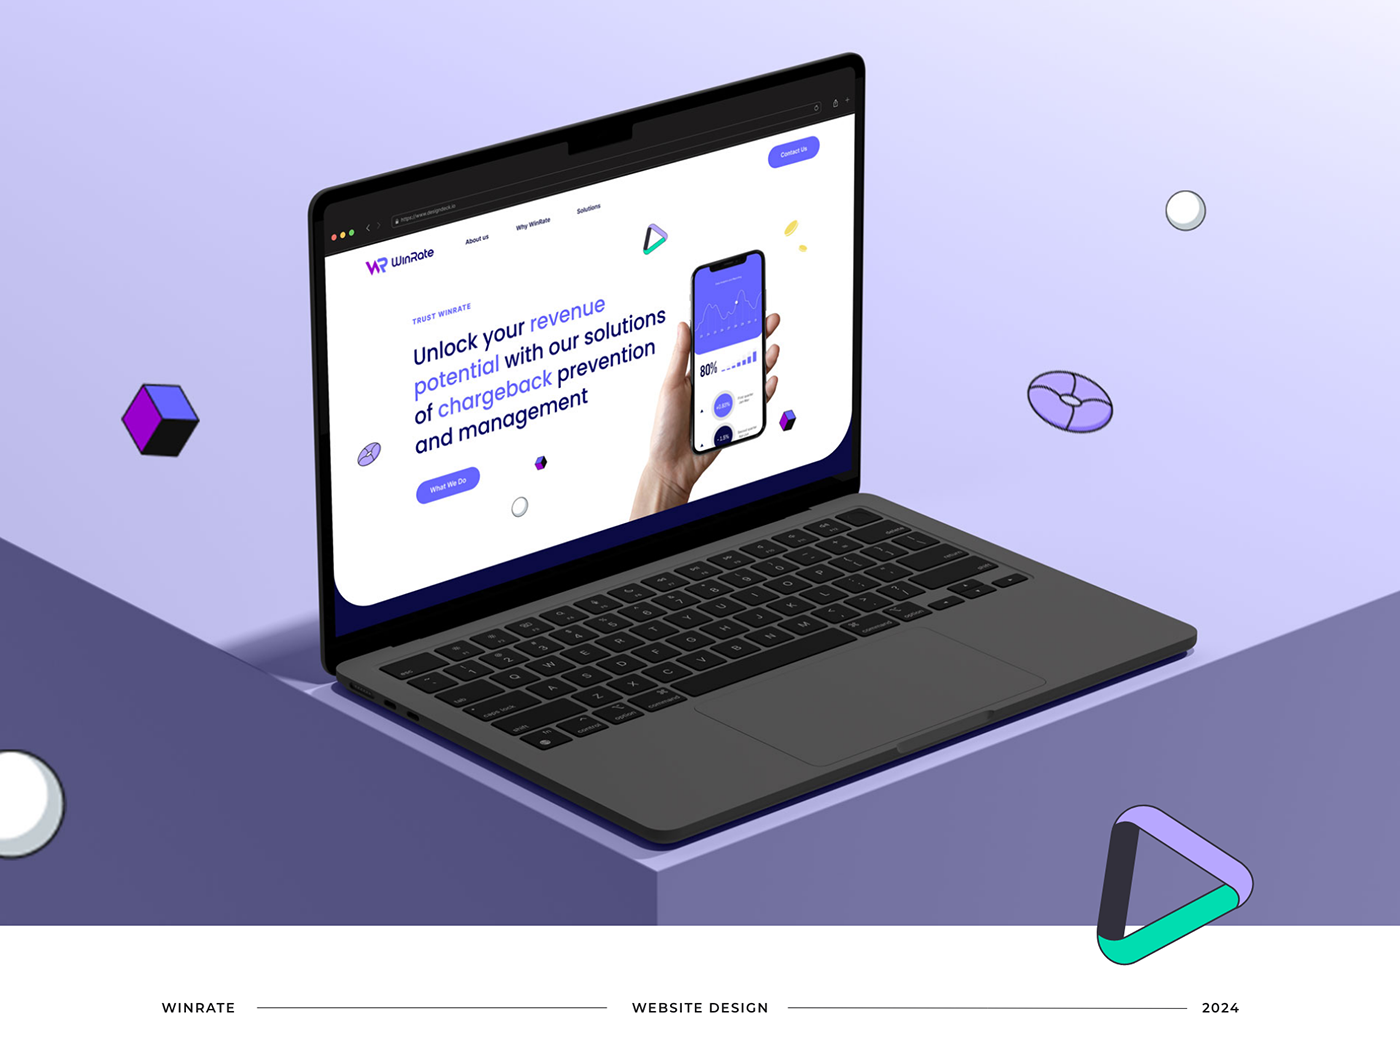 A home page mocked up on the laptop in isometric environment with little elements floating around.